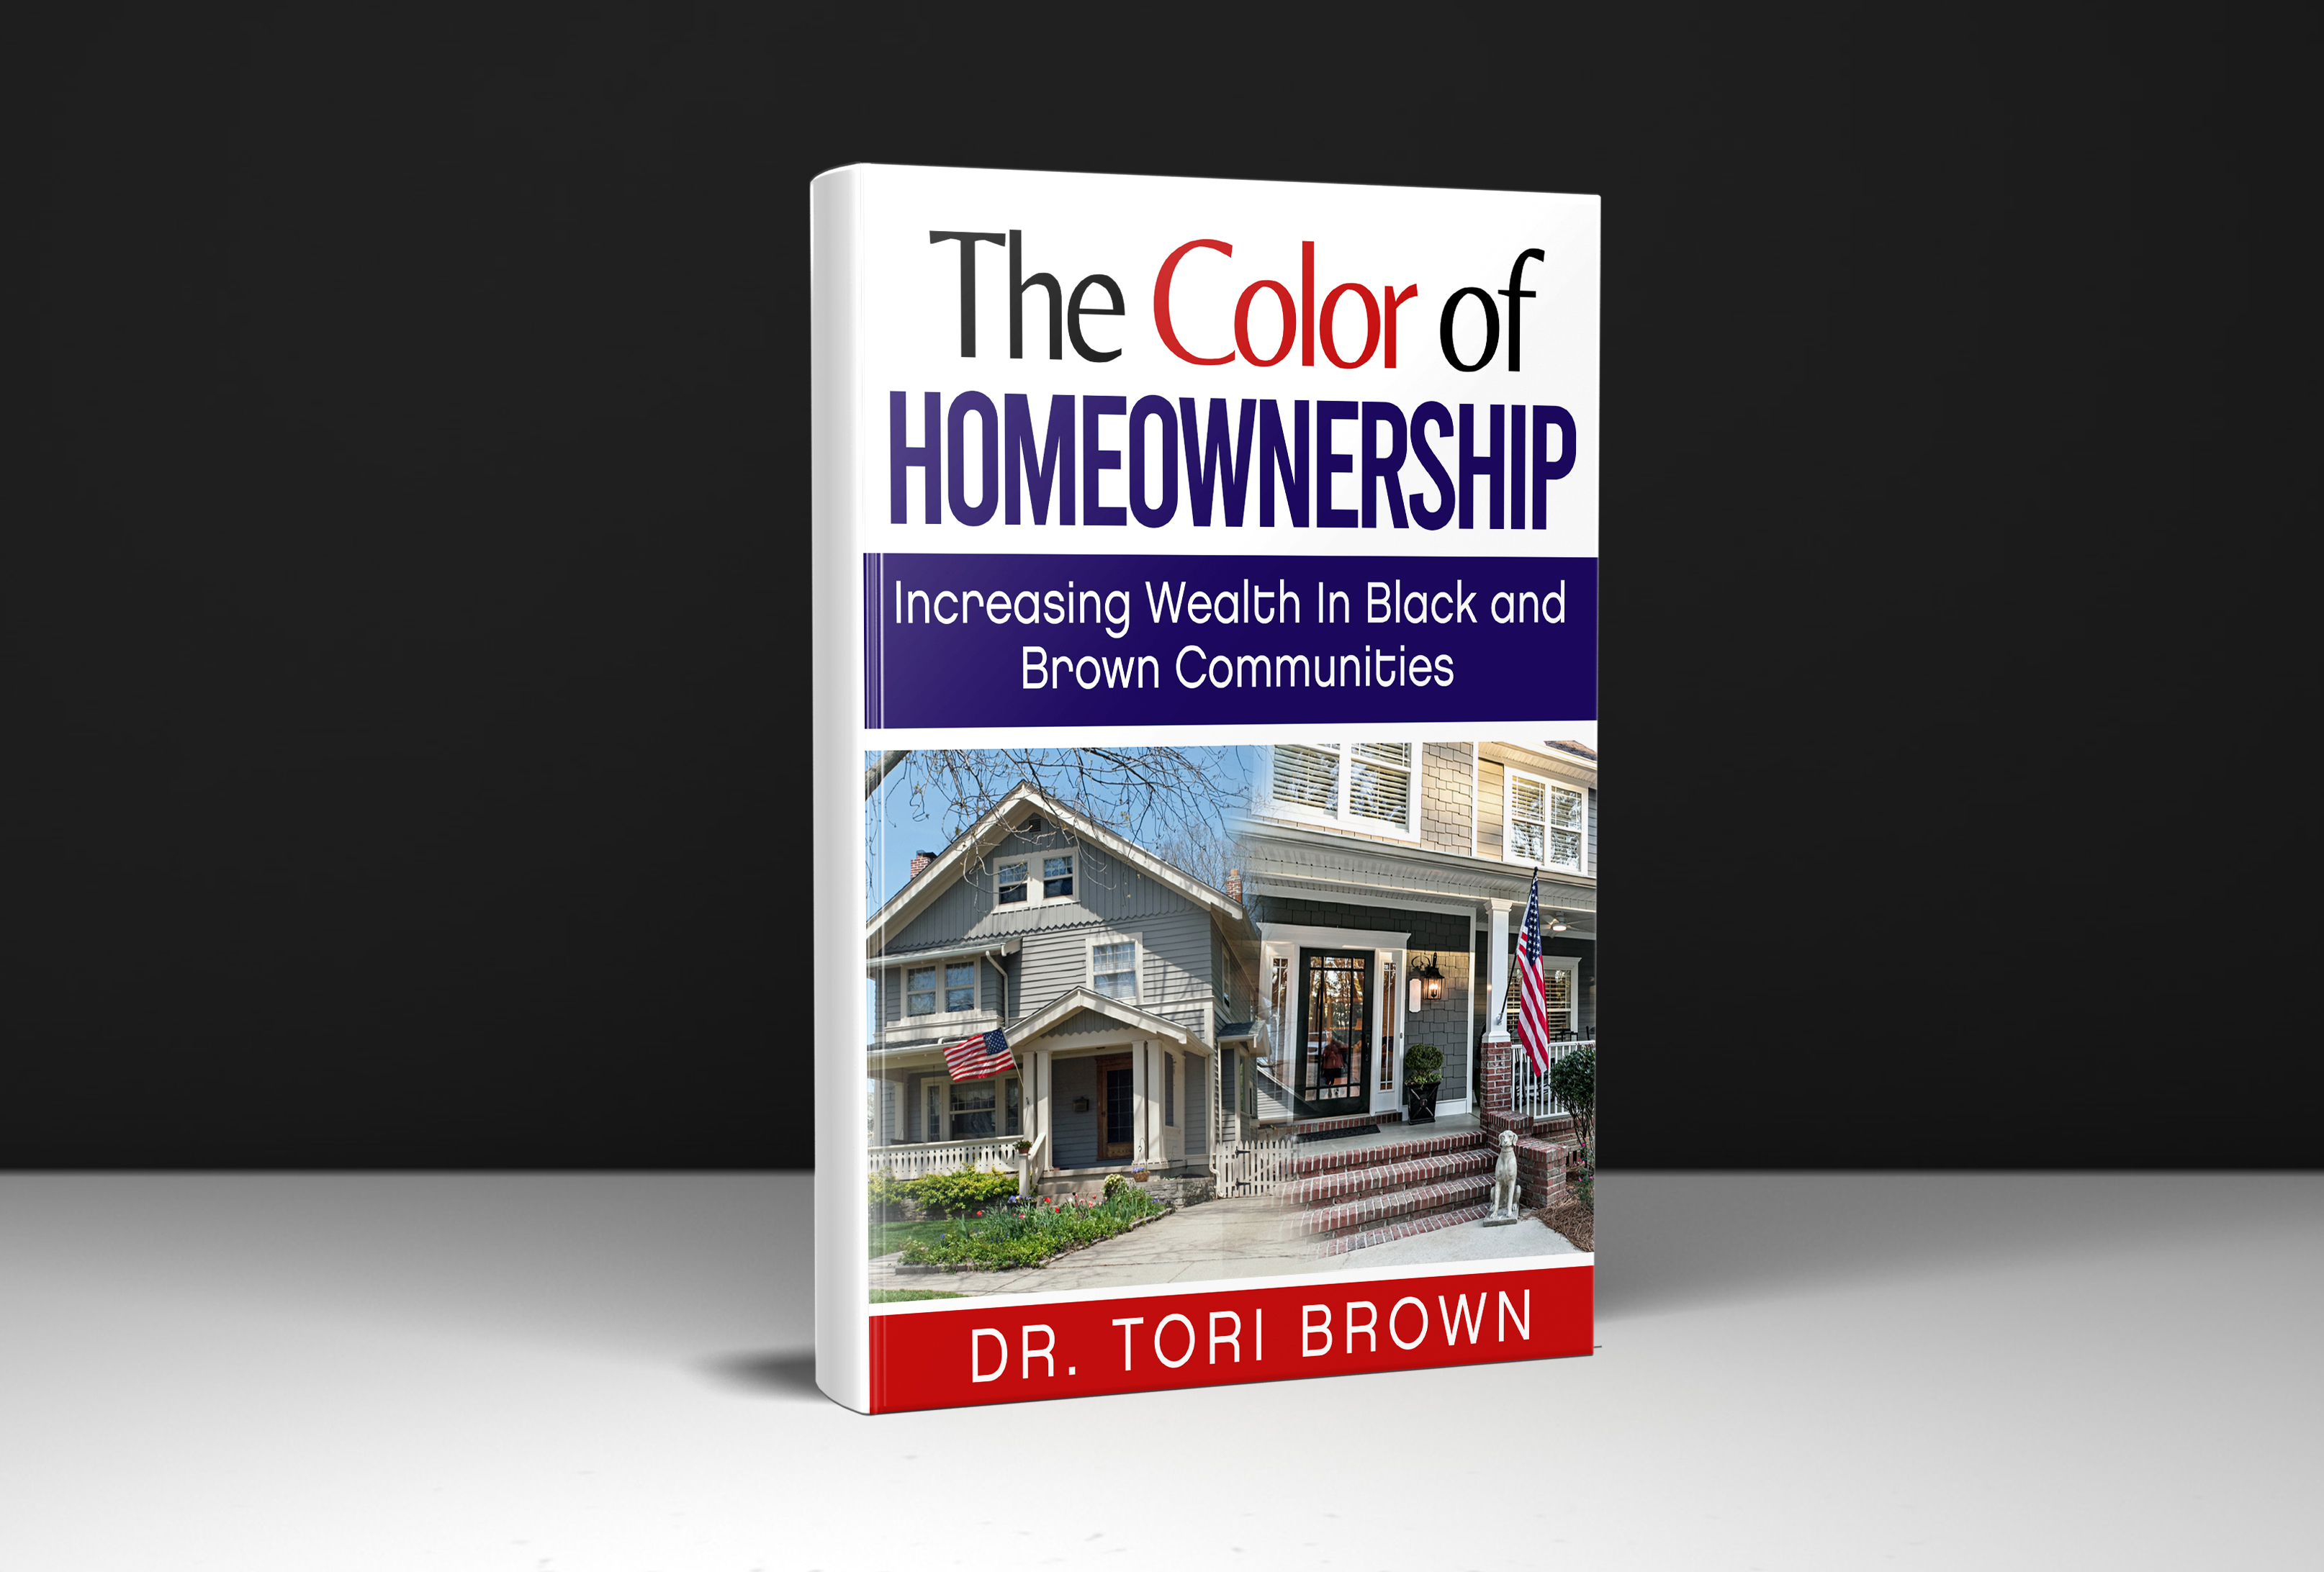 Dr. Tori Brown Teaches The Art Of Homeownership In Her New Book The Color of Homeownership